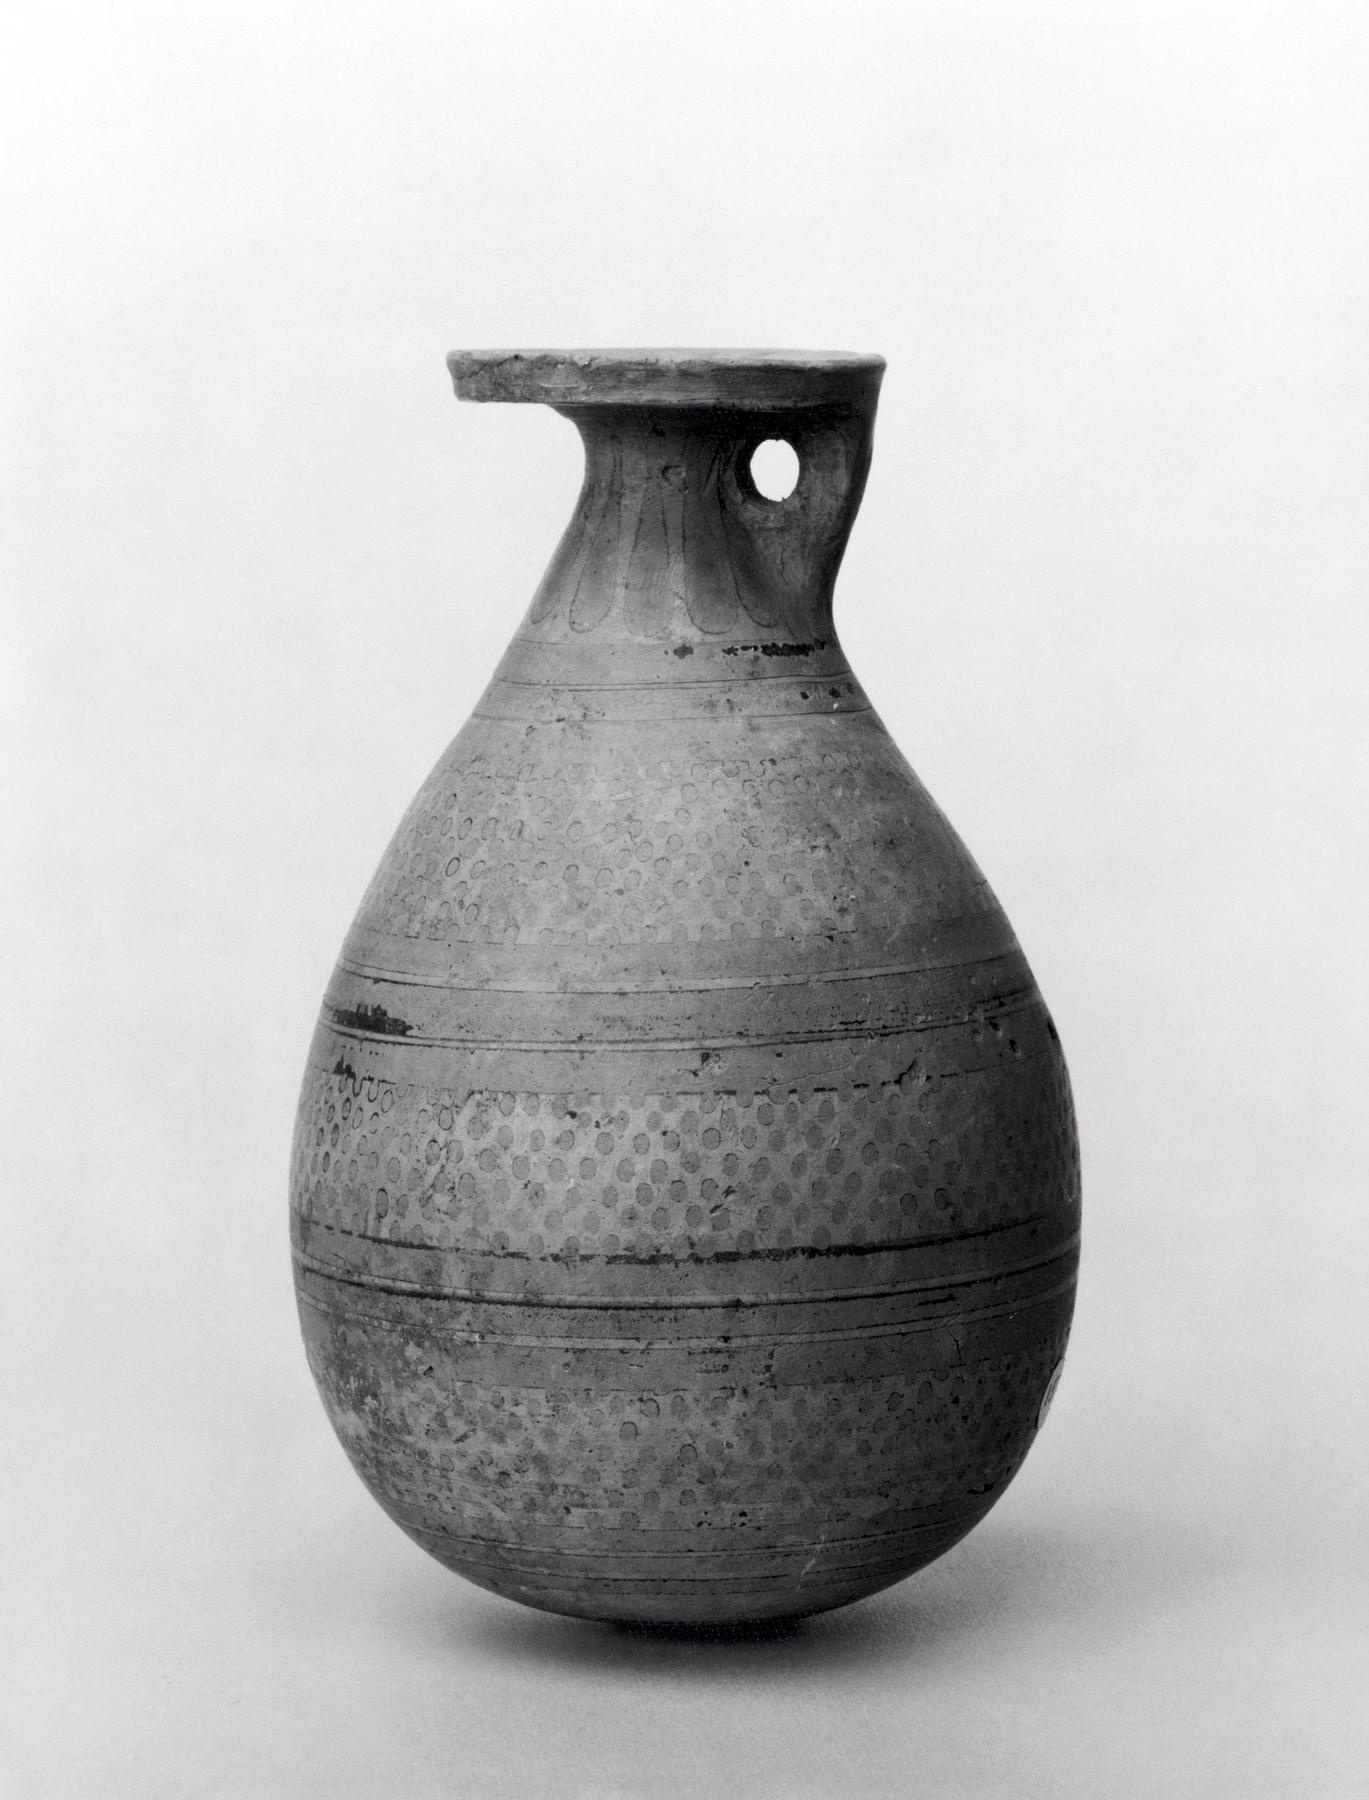 Aryballos with palmette leaves, dots, and bands, H657